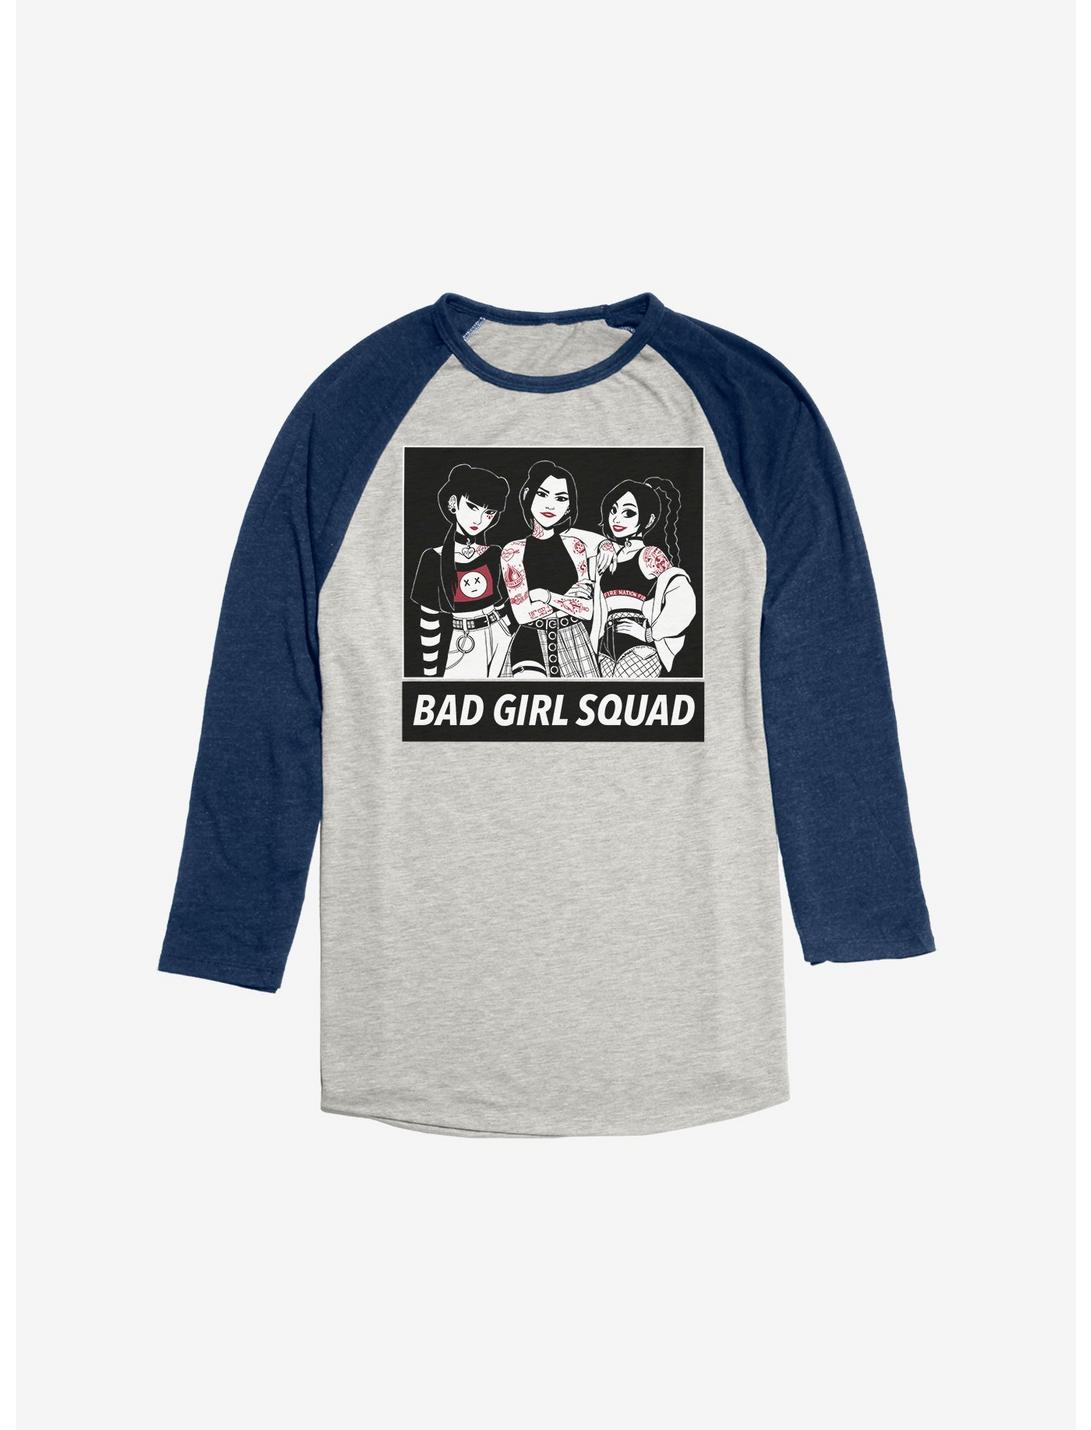 Avatar: The Last Airbender Bad Girl Squad Raglan, Oatmeal With Navy, hi-res